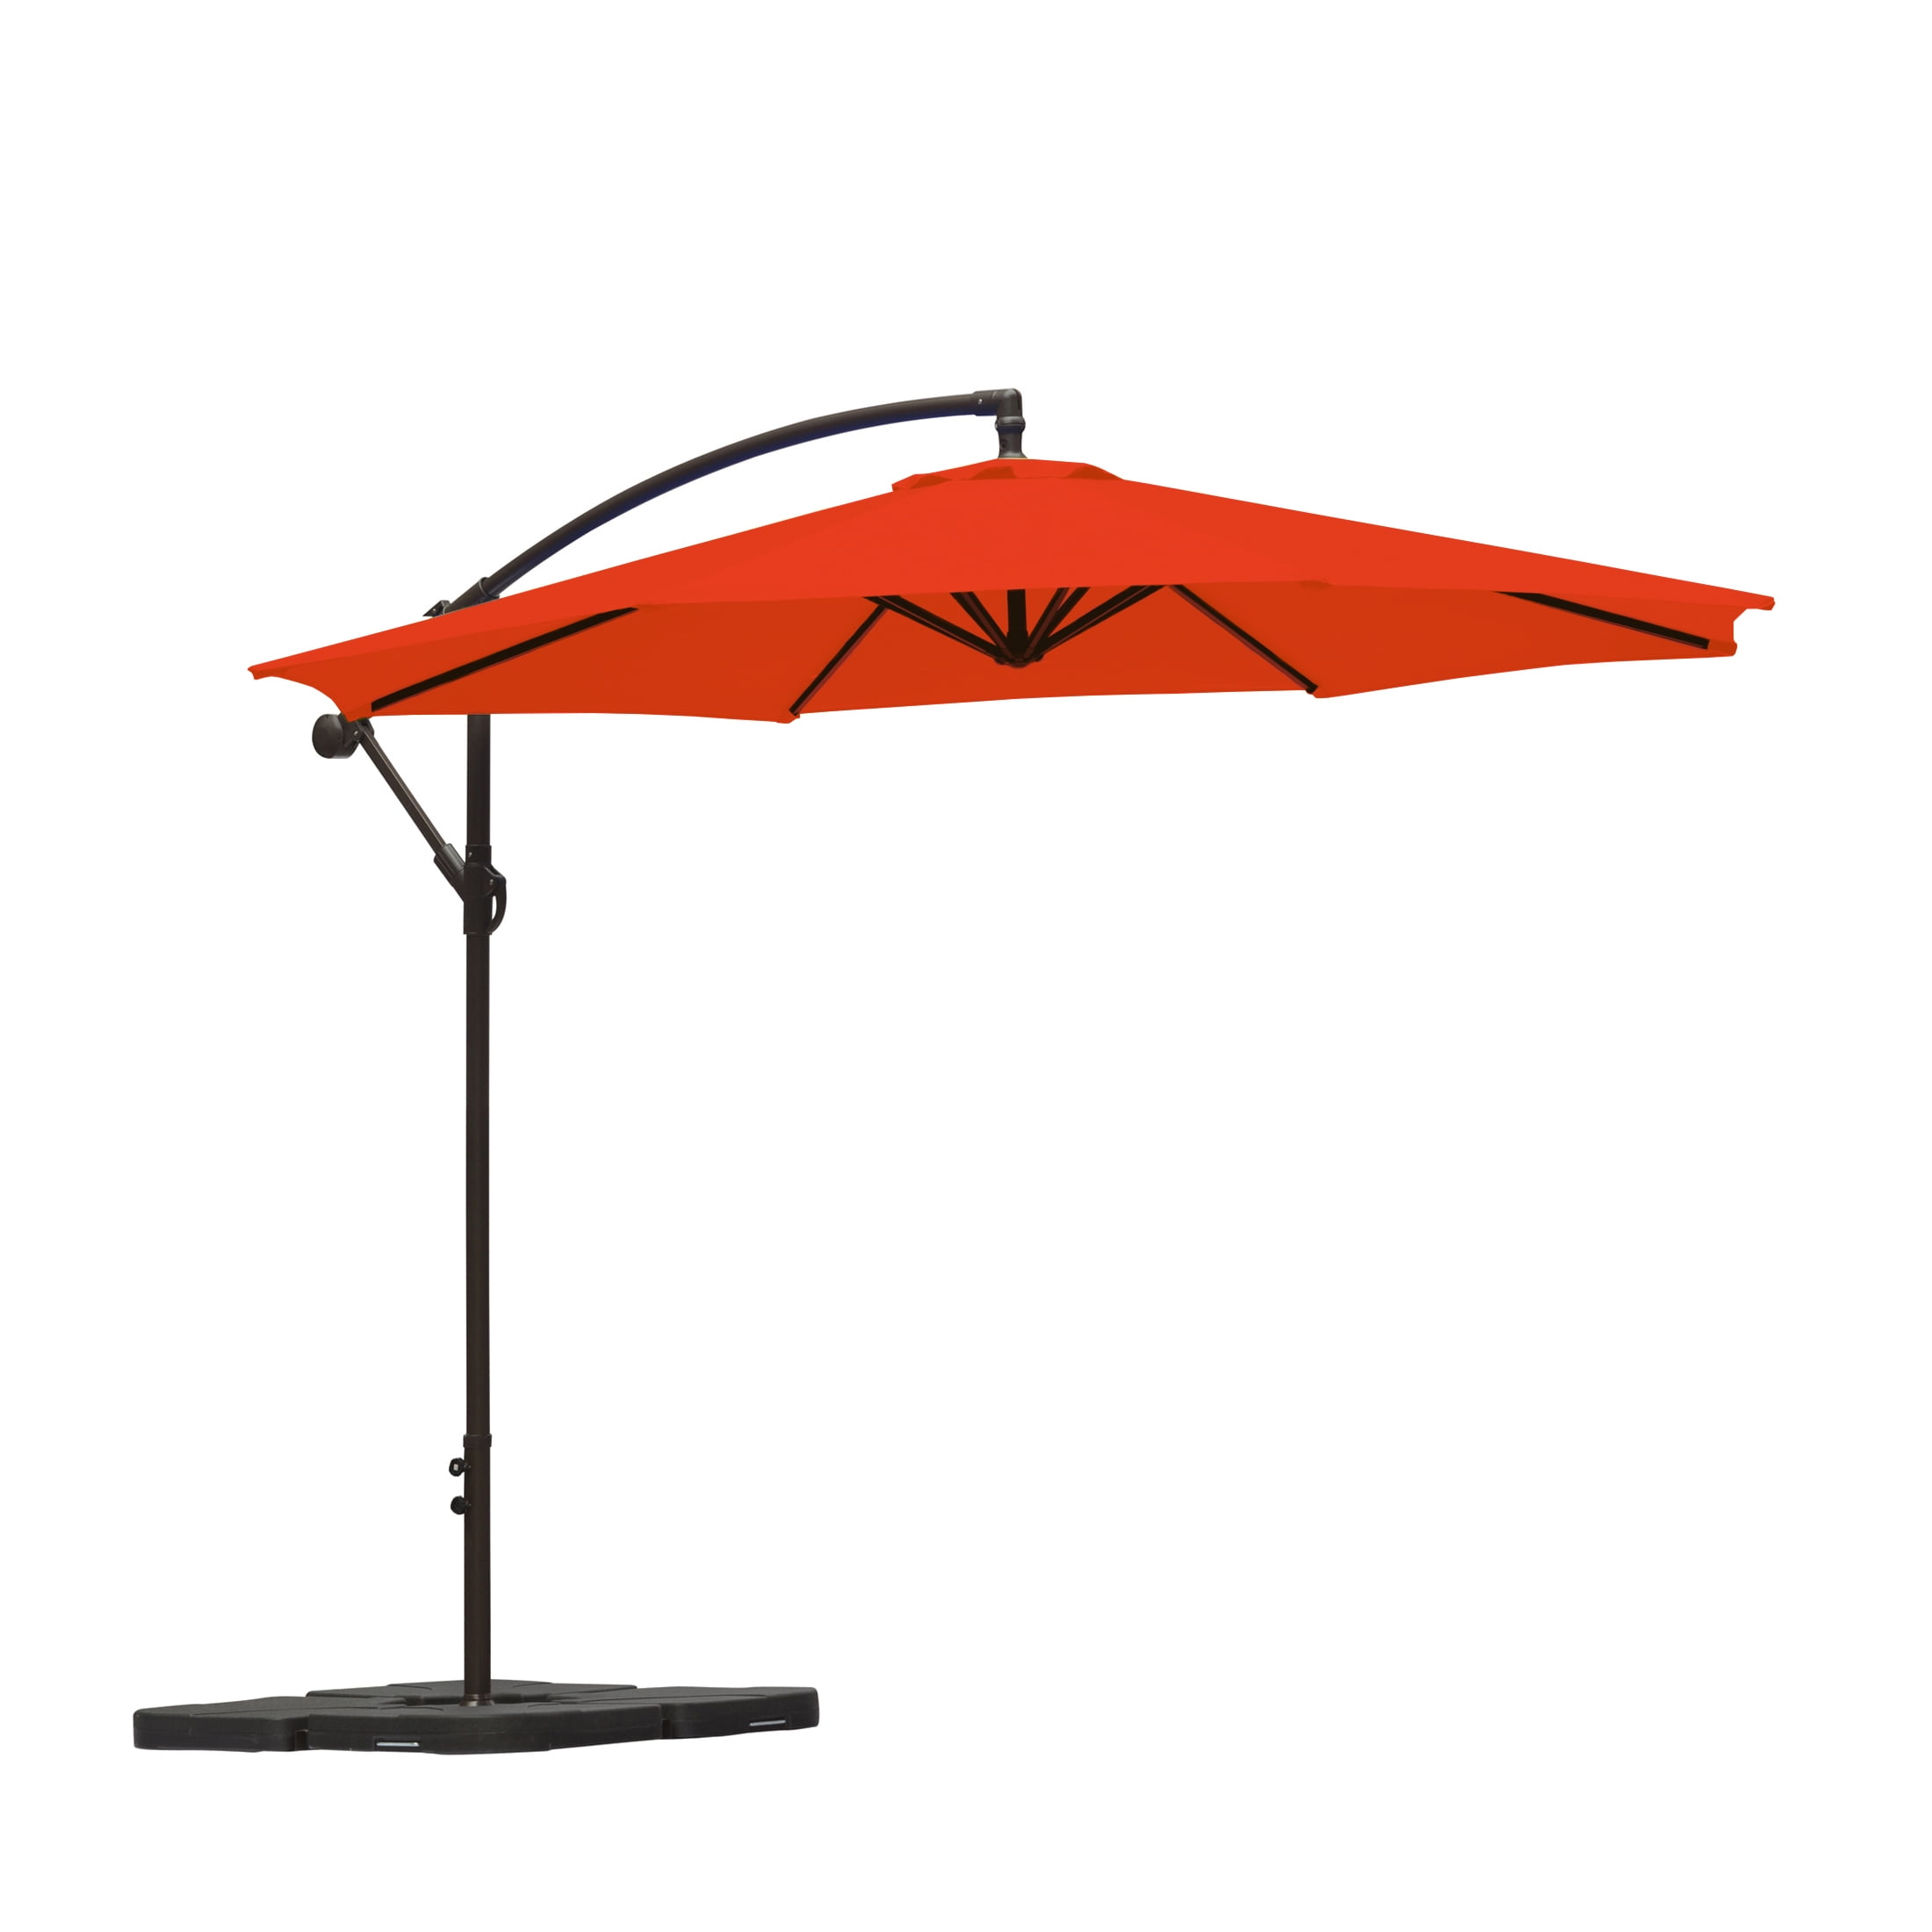 Hanging Sun Shade Offset Outdoor UV Resistant Red Patio Umbrella 7.7/10/15 Ft 